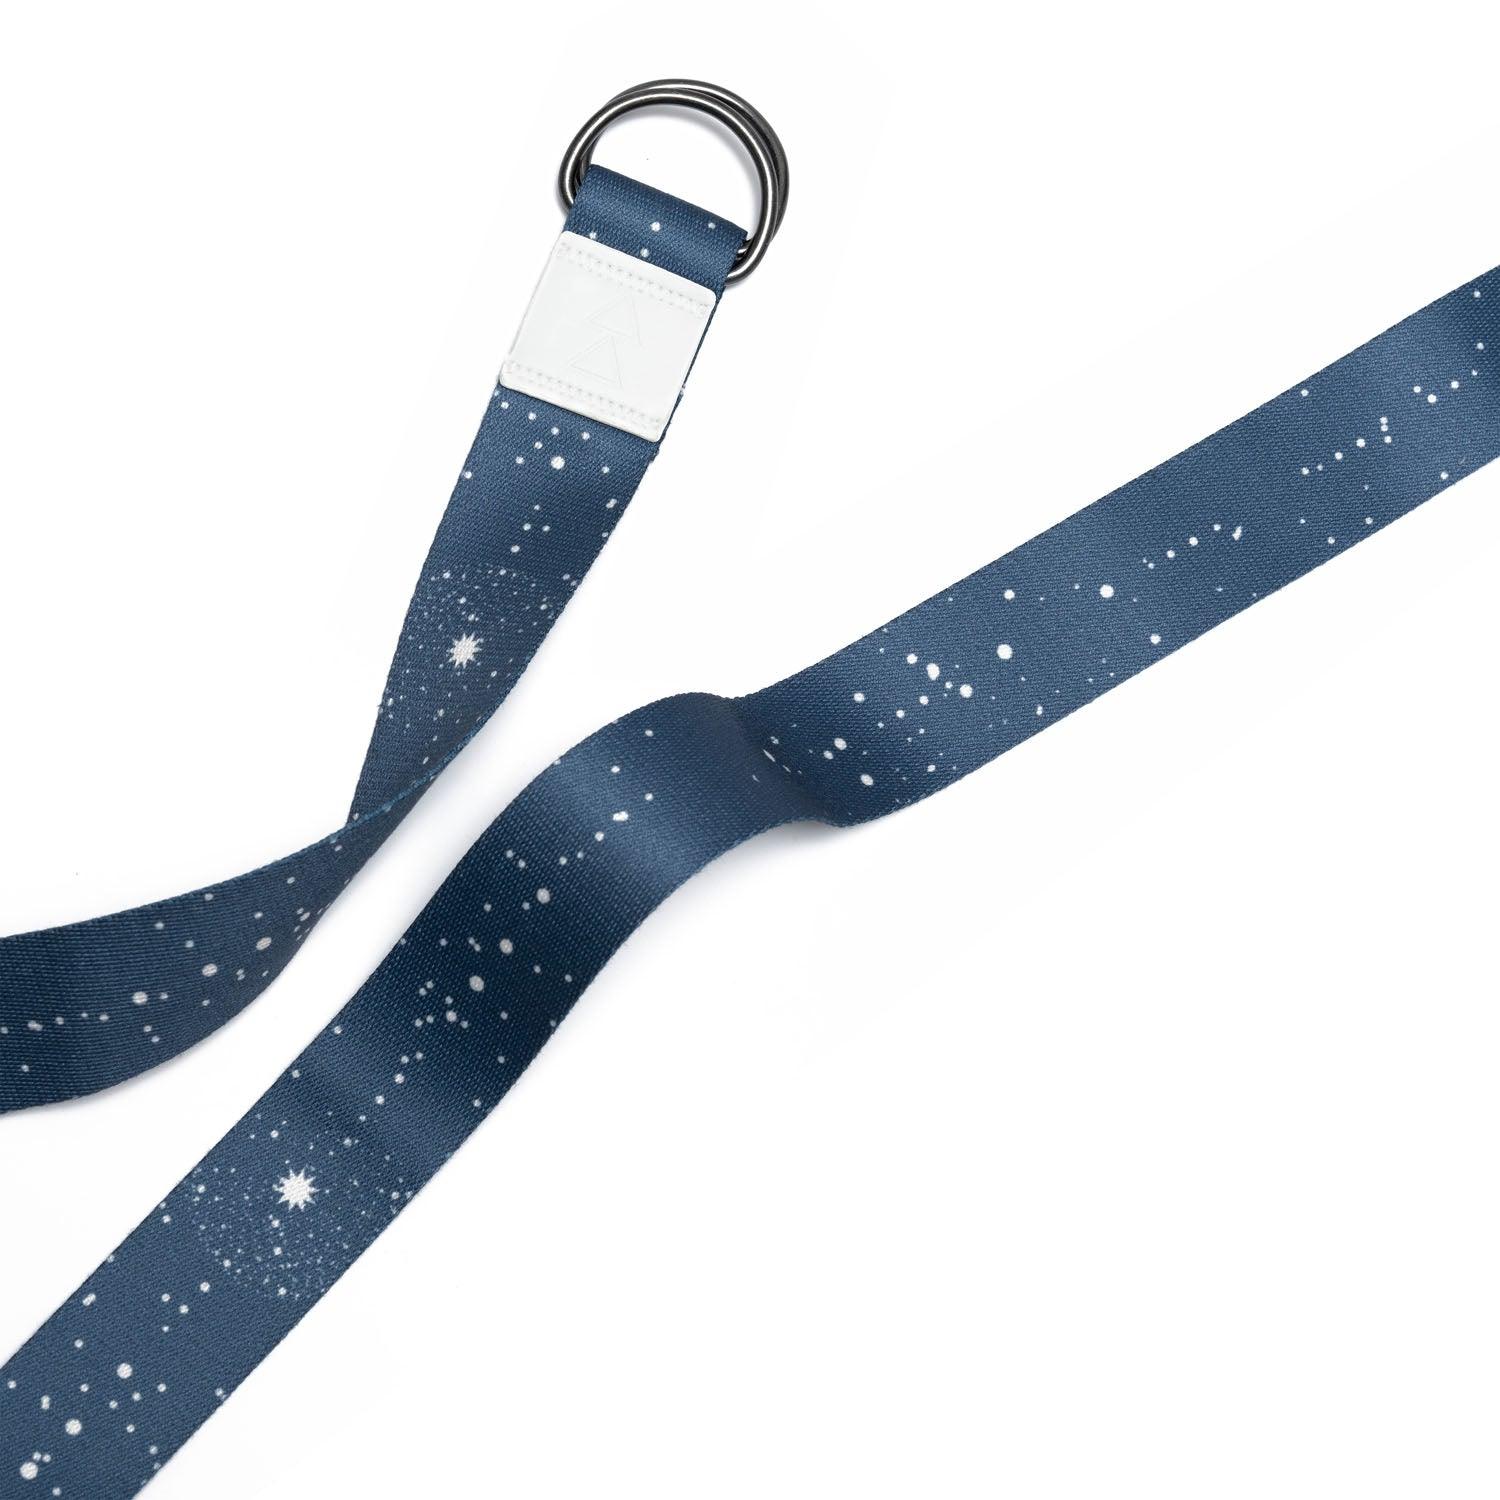 Yoga Strap - Celestial - Best for Stretching, Pilates, Physical Therapy - Yoga Design Lab 